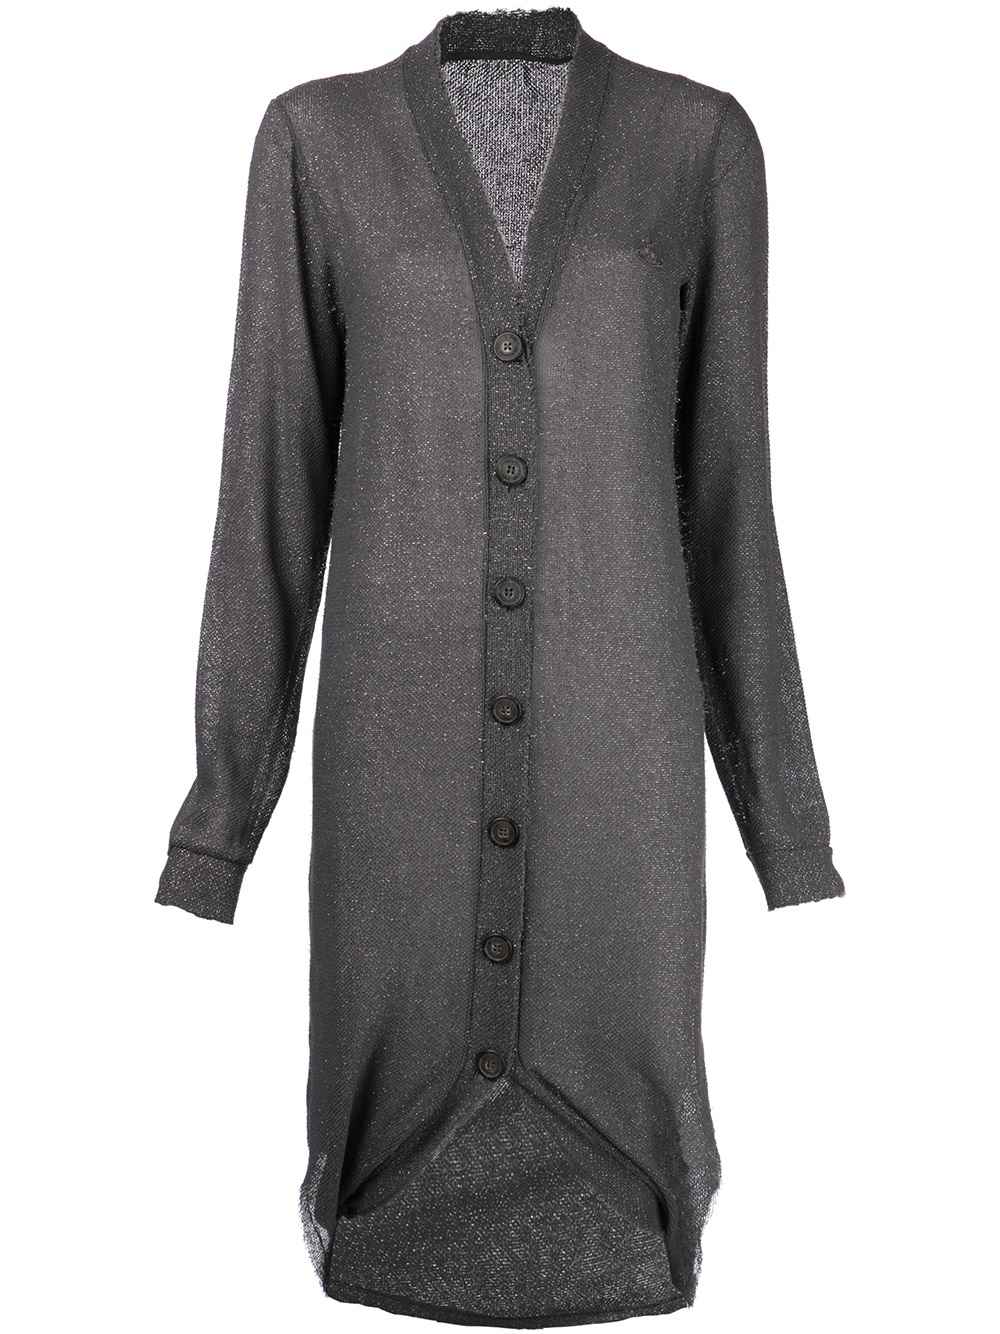 Lyst - Vivienne Westwood Anglomania Metallic Long Cardigan in Gray